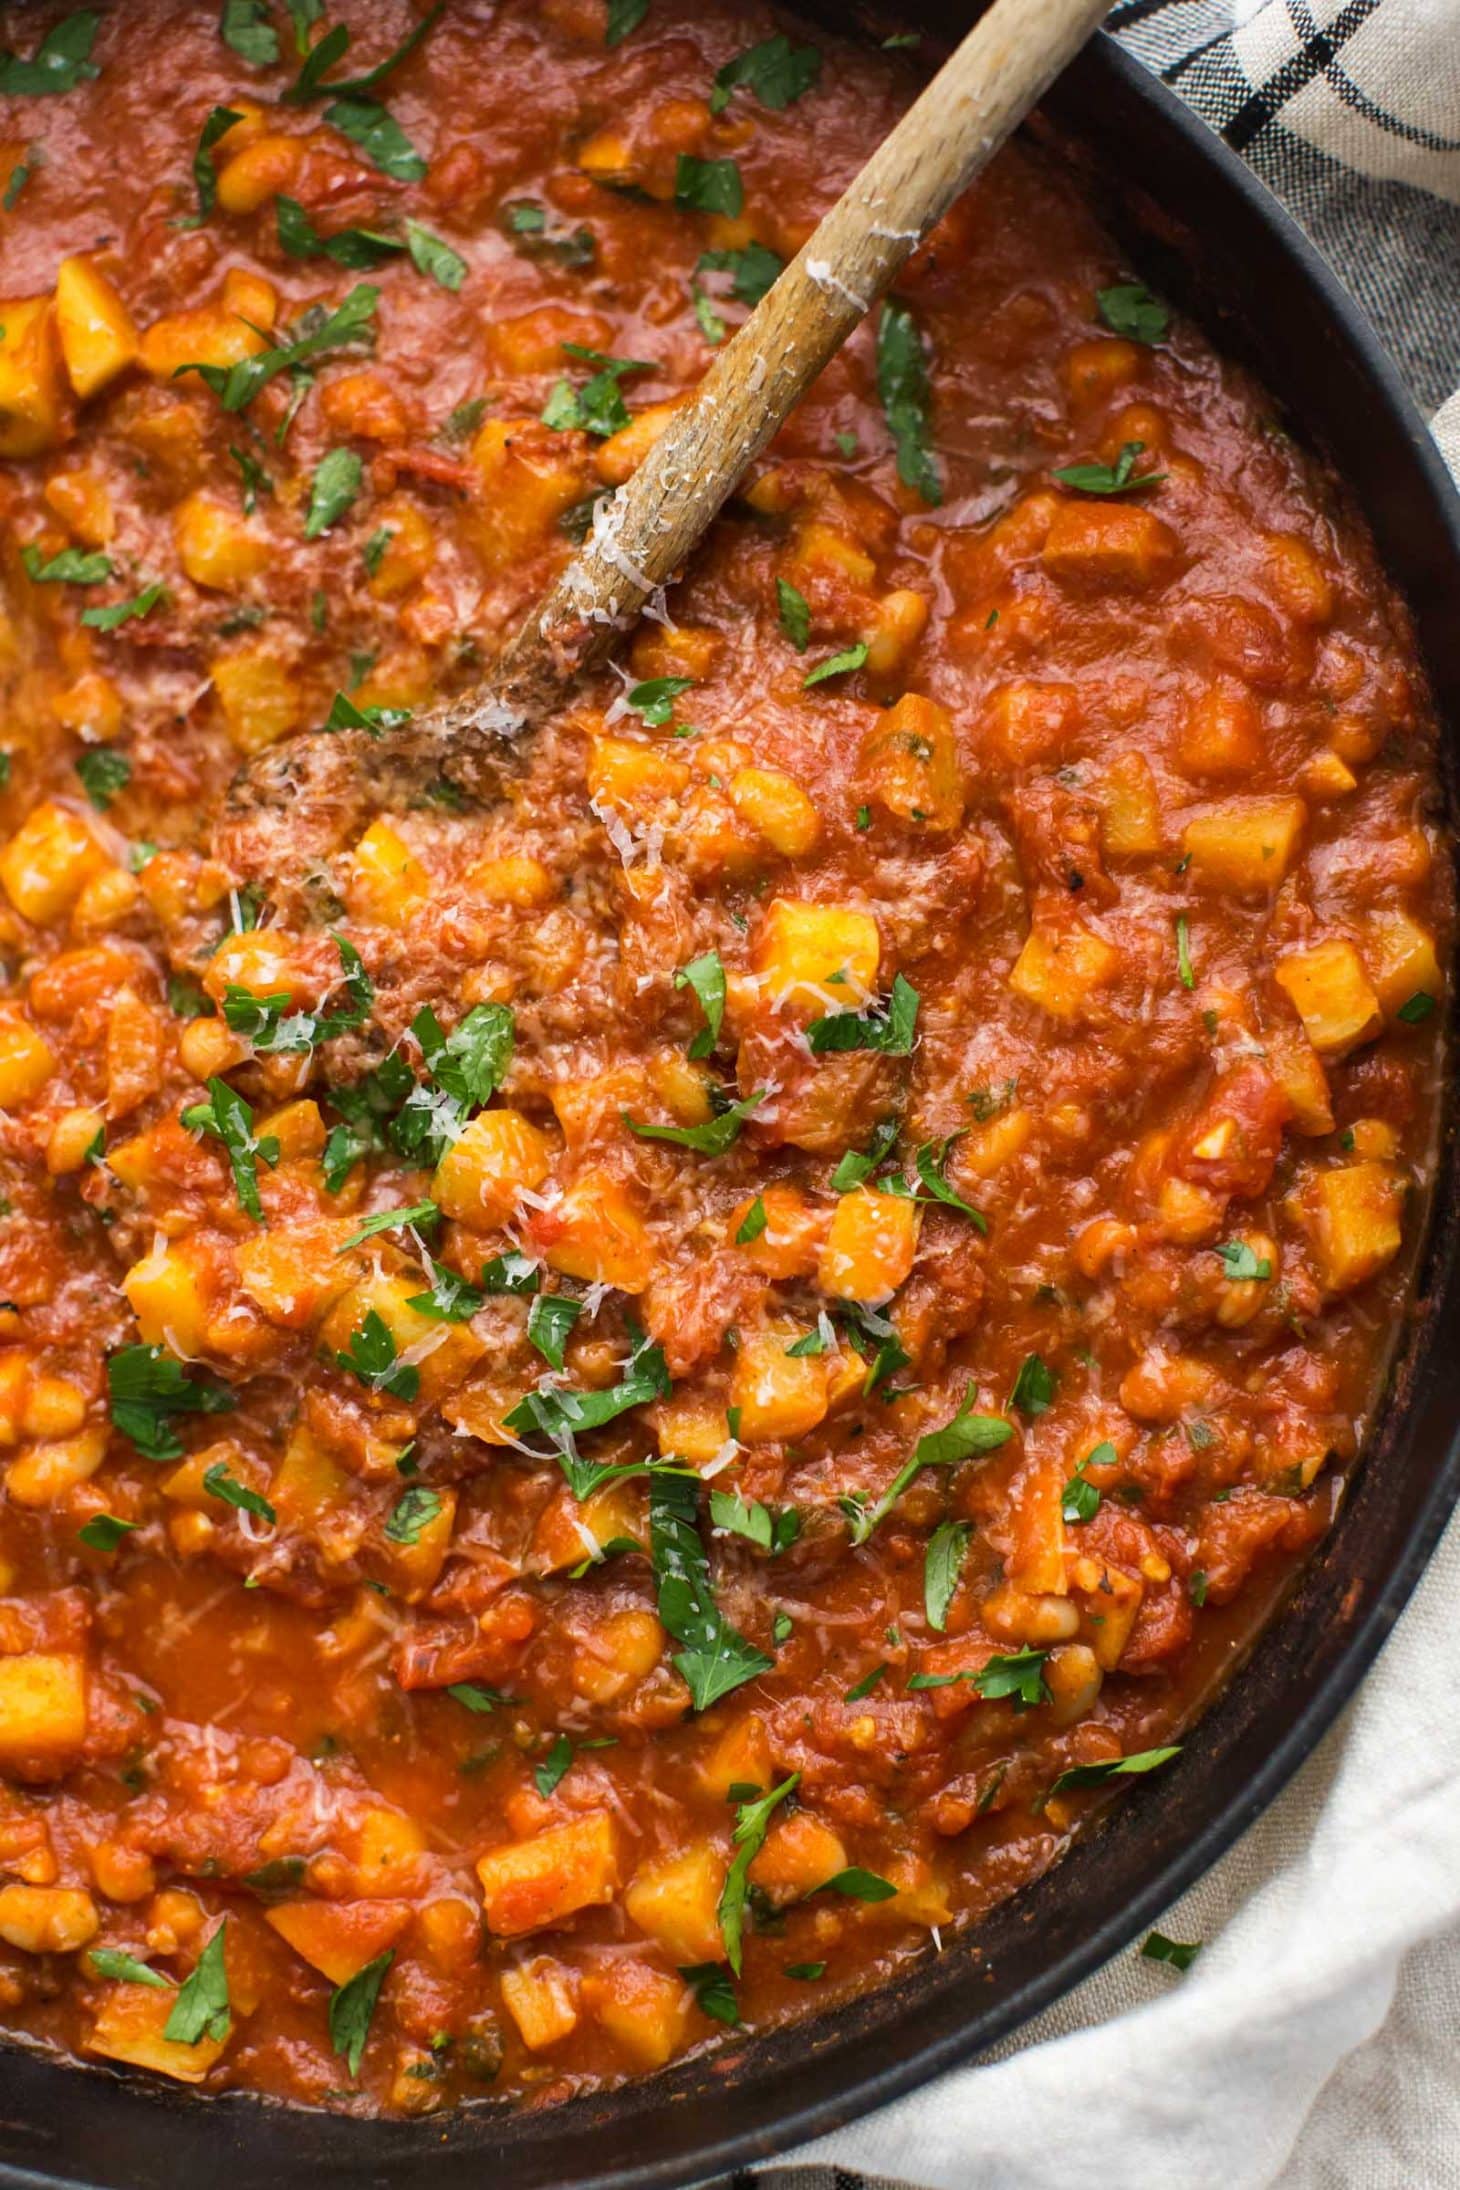 White Beans in Spicy Tomato Sauce